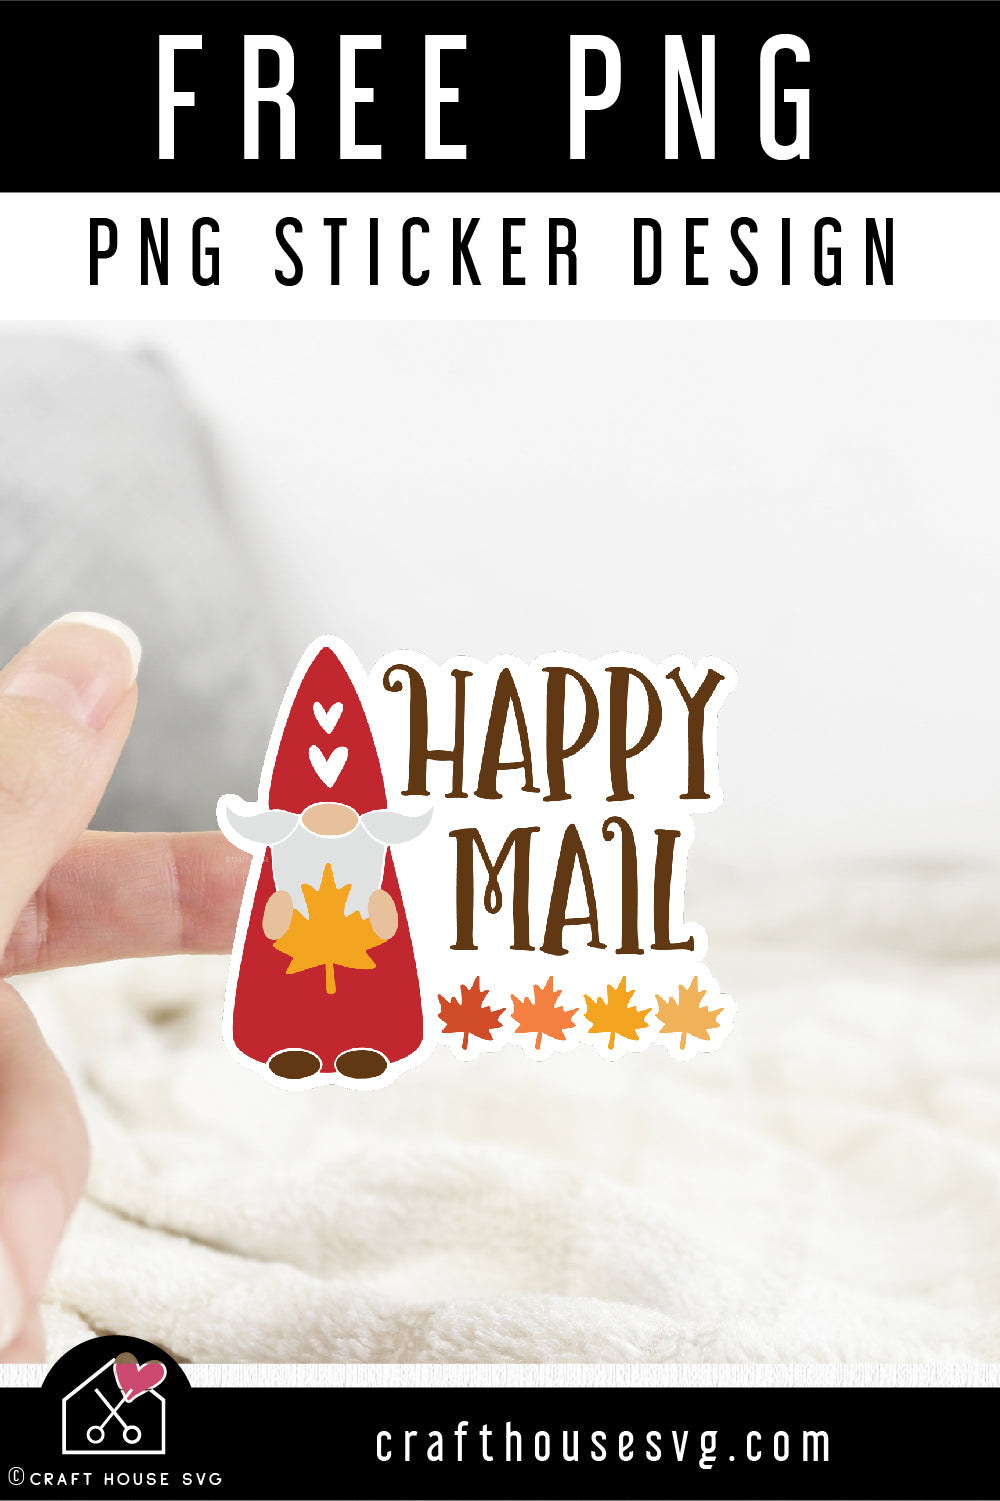 FREE Happy mail Fall gnome Sticker Design PNG file | FB275